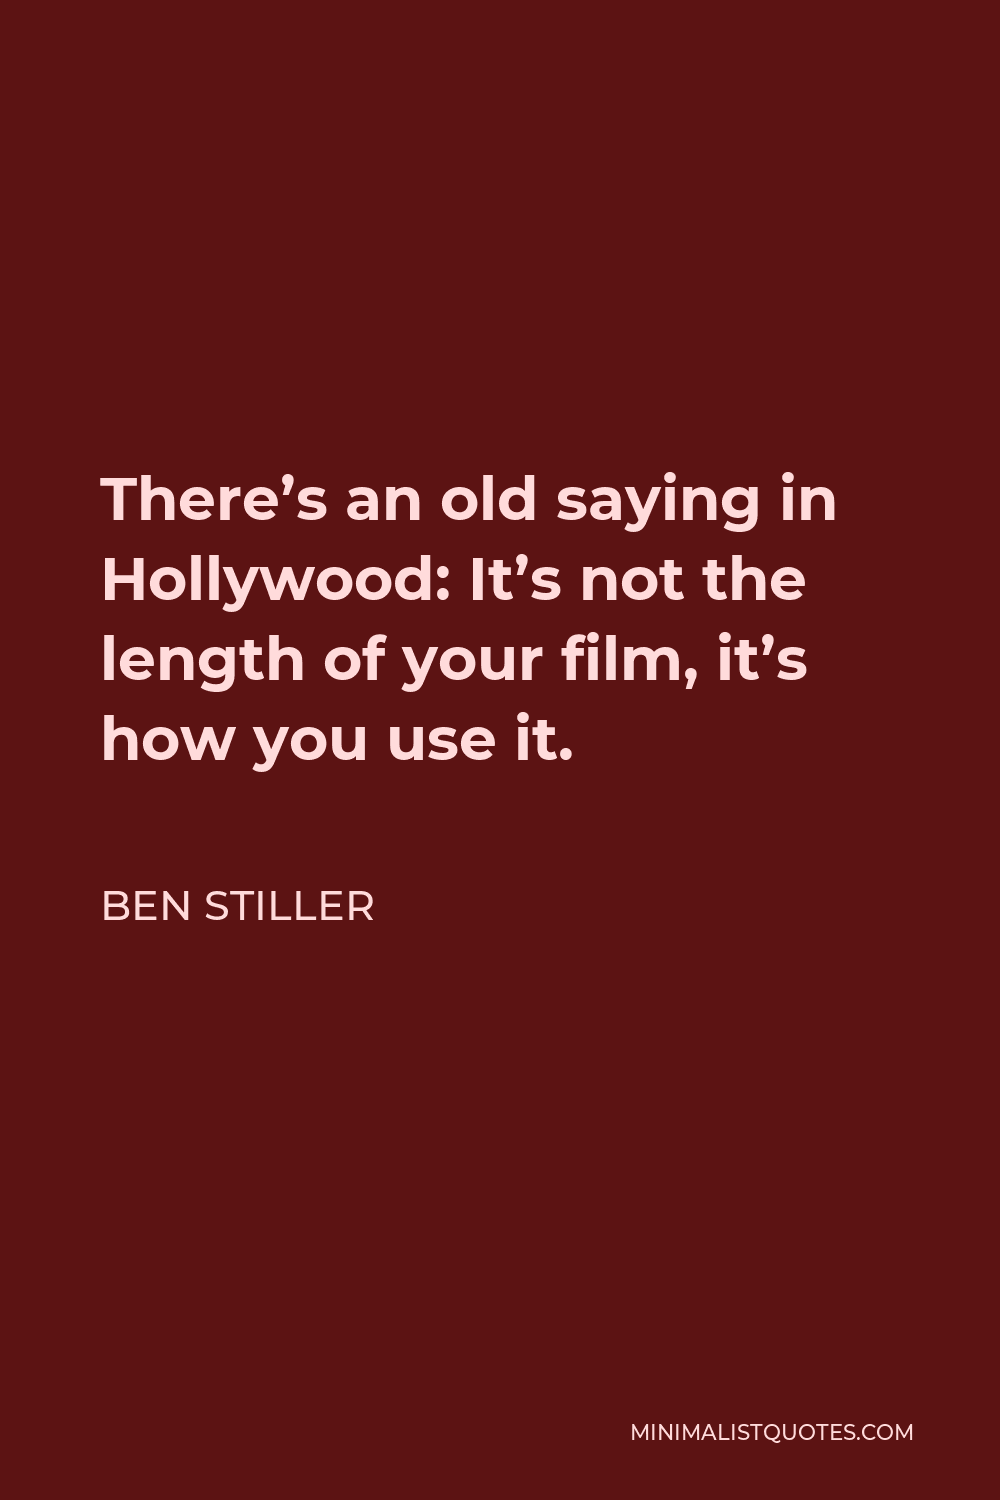 Ben Stiller quote: The failure of The Cable Guy impacted my career. I